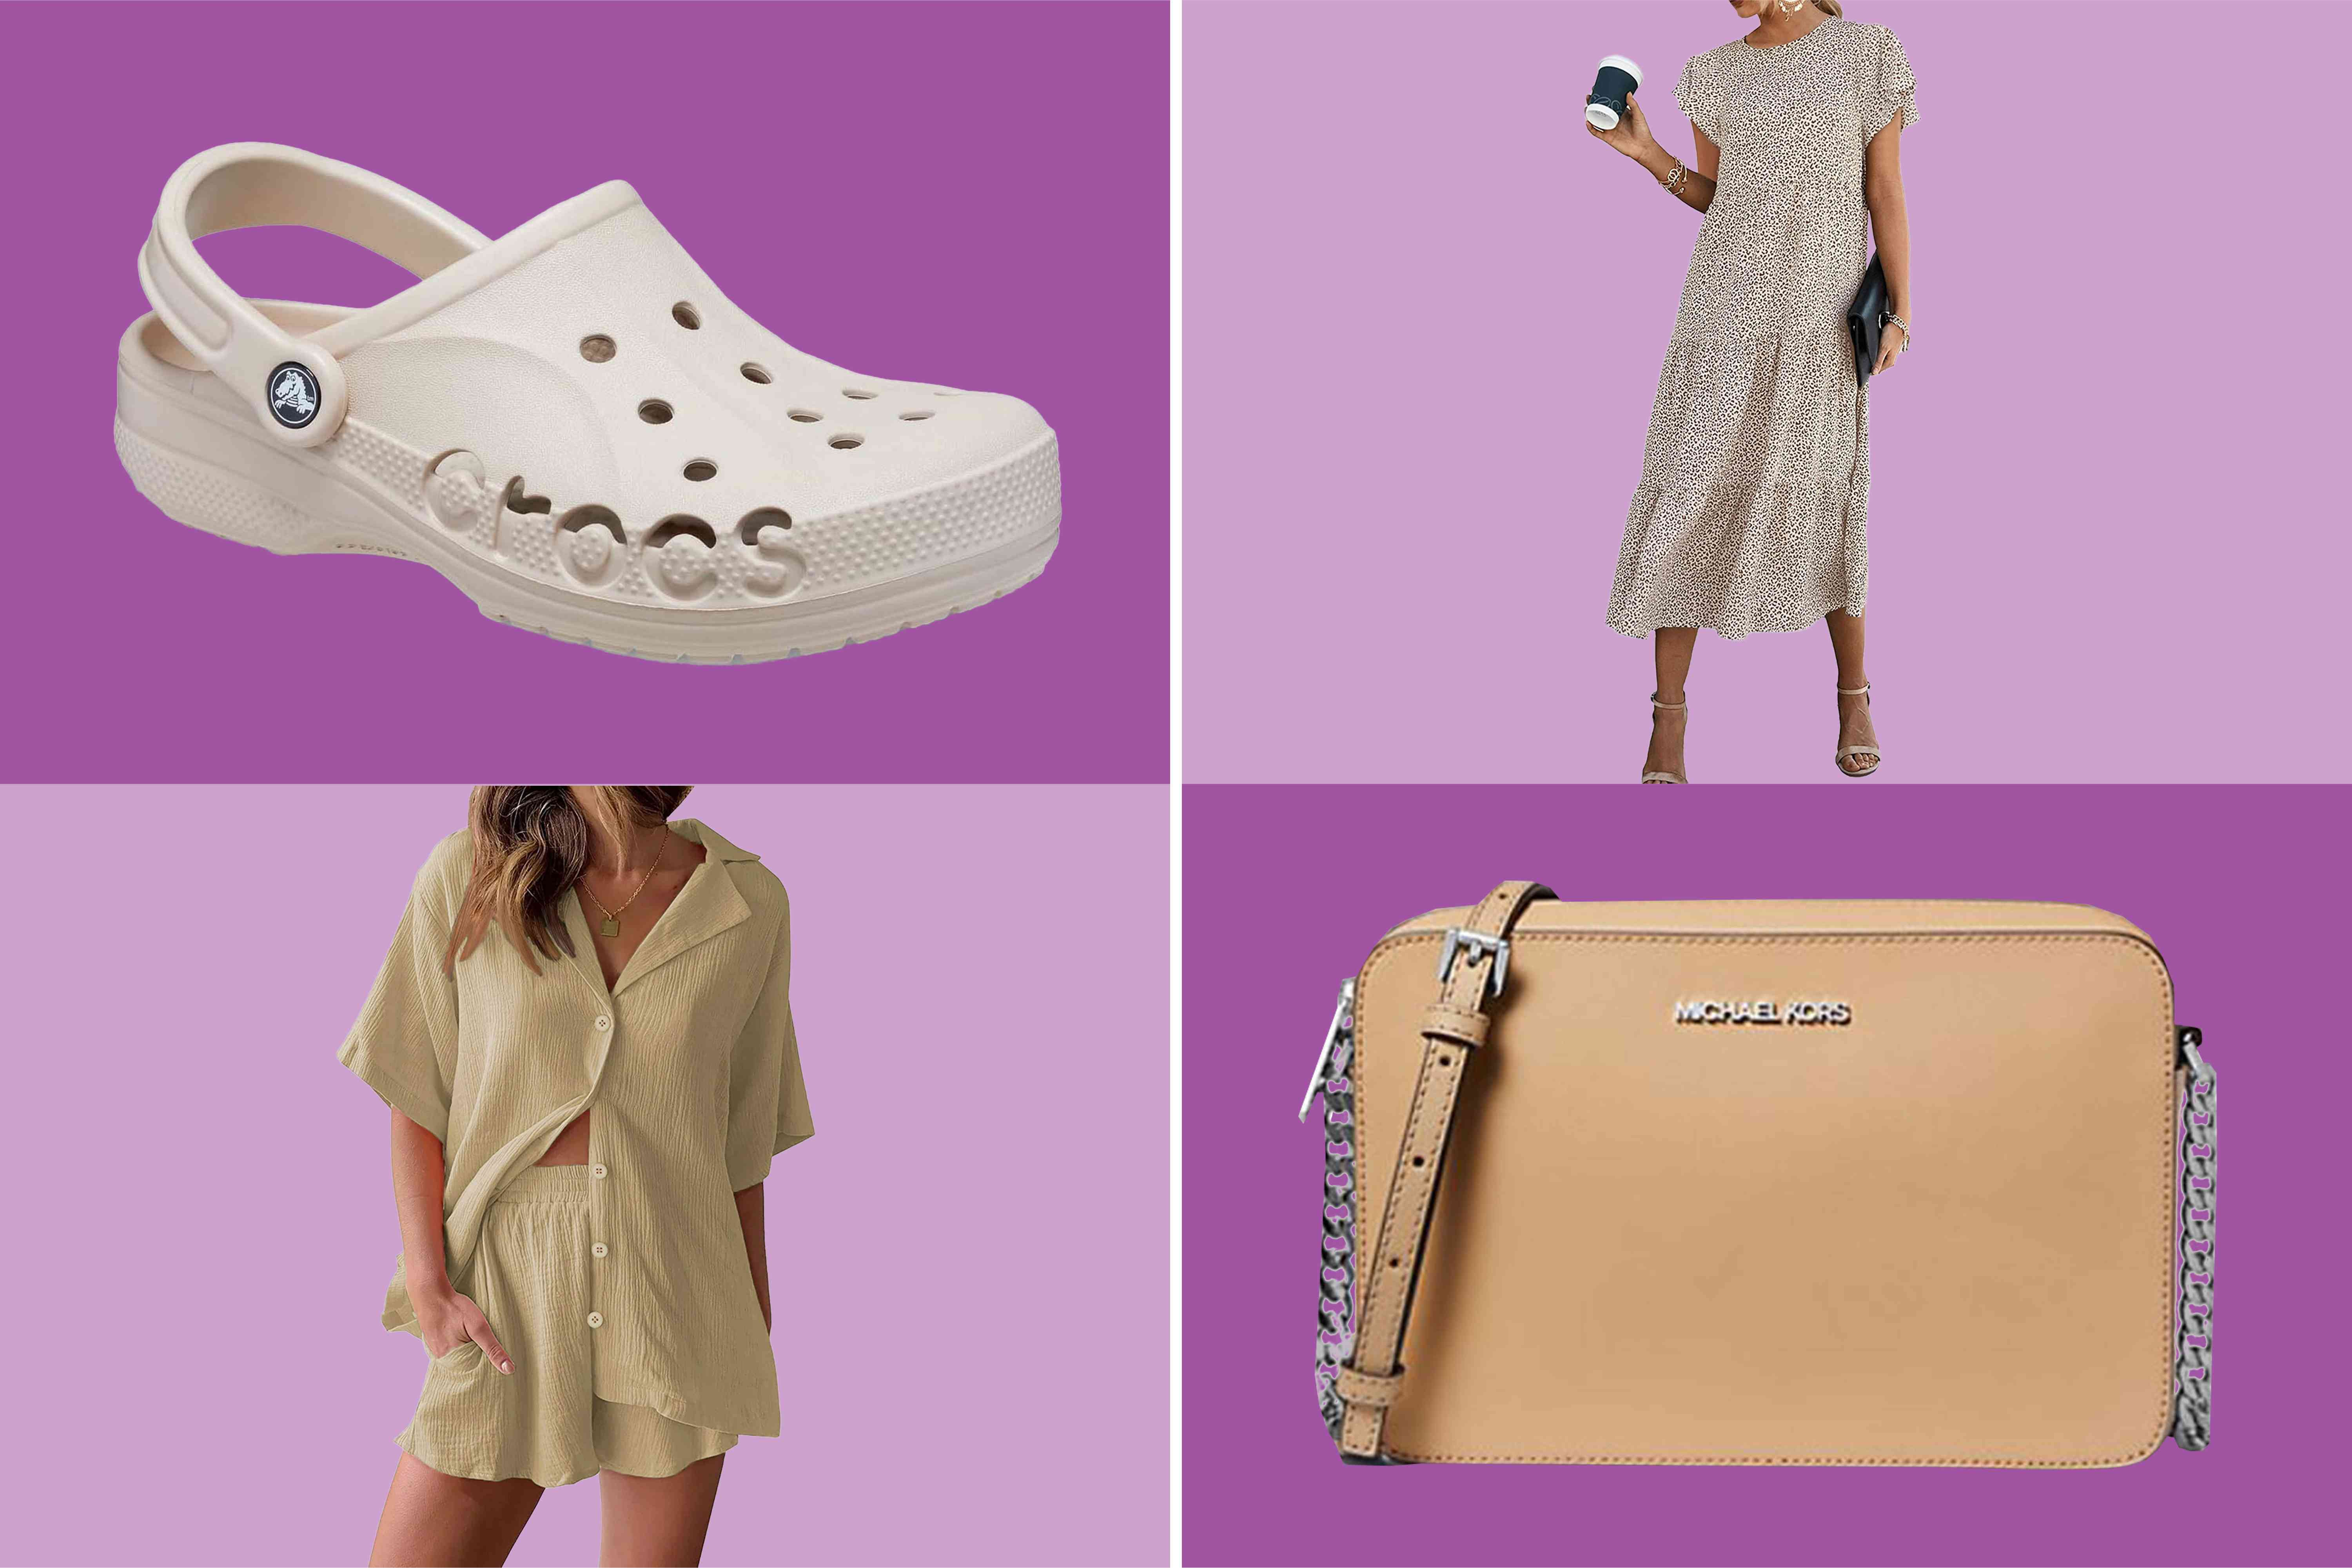 Michael Kors, Crocs, Reebok, and More Top Fashion Brands Are Up to 74% Off at Walmart’s Huge Summer Sale